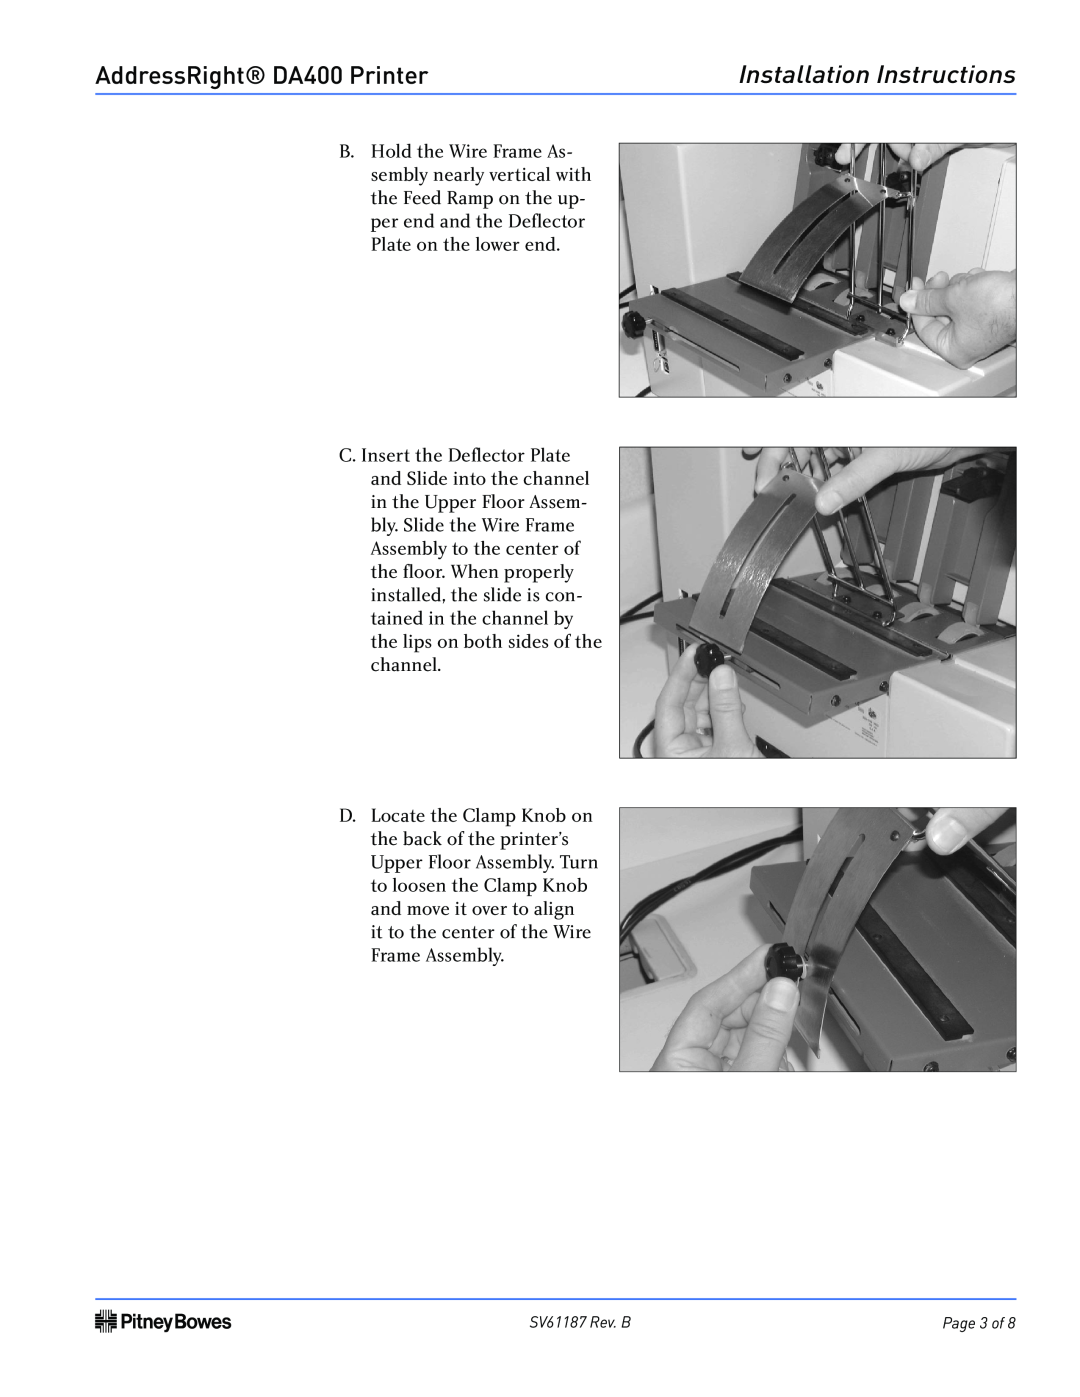 Pitney Bowes installation instructions AddressRight DA400 Printer, Installation Instructions, Page 3 of 